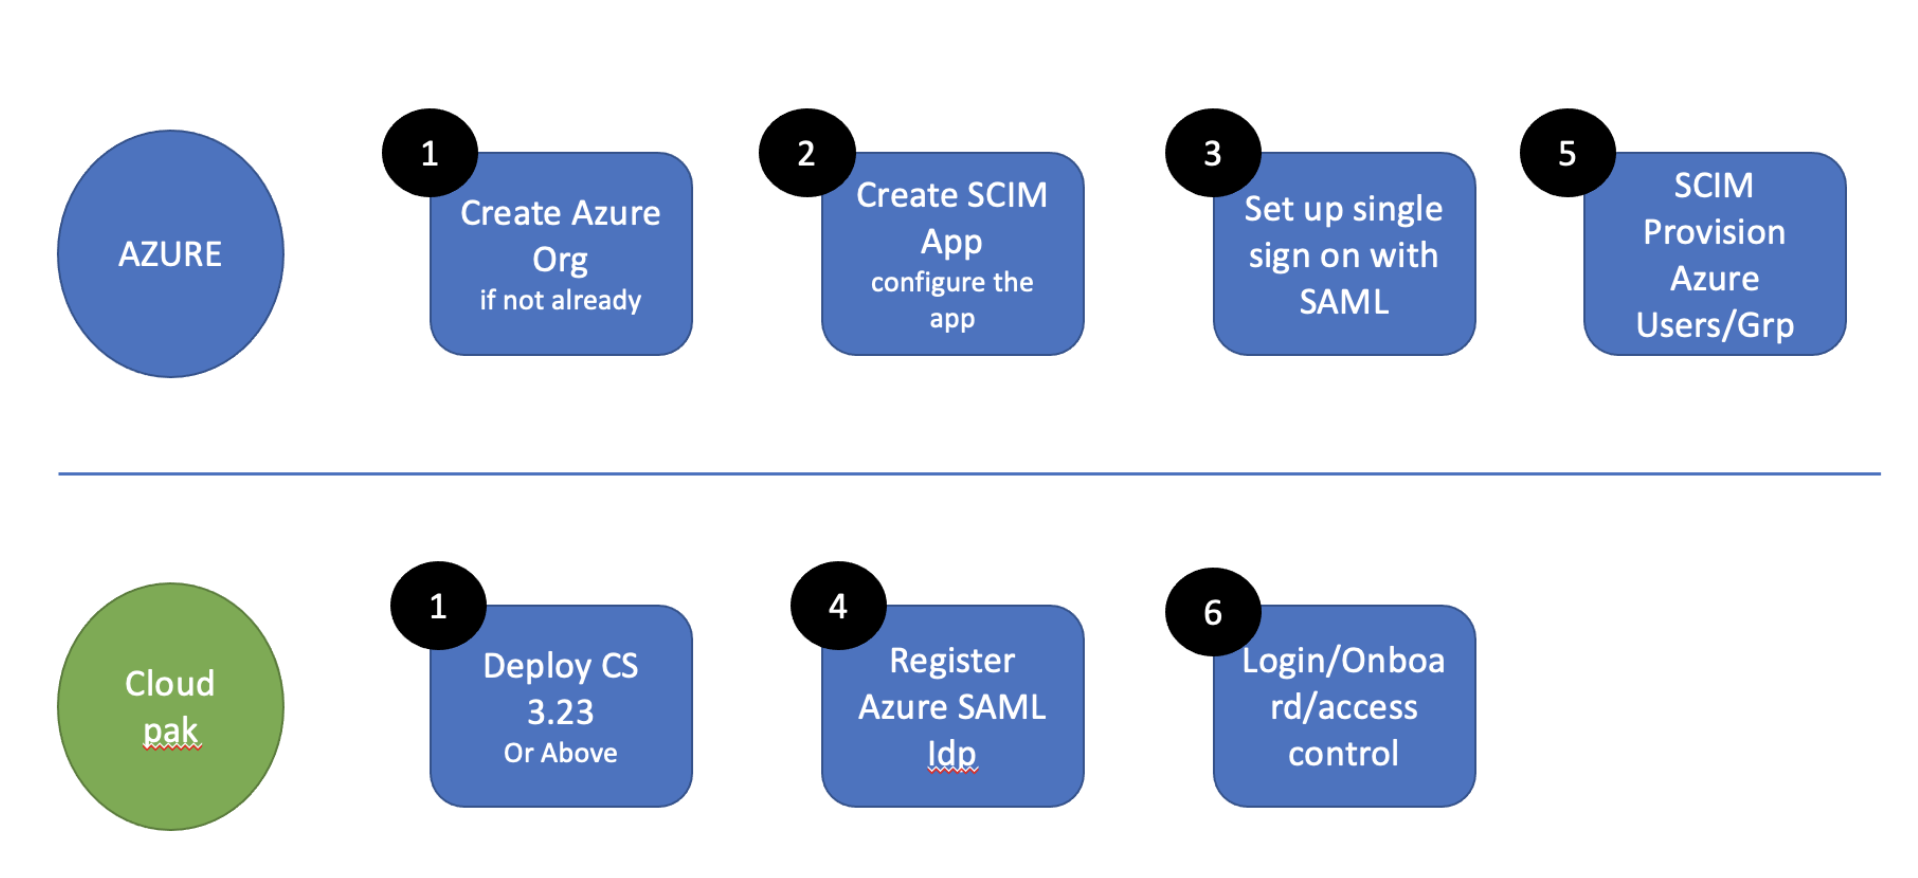 The image shows high-level process diagram for Azure